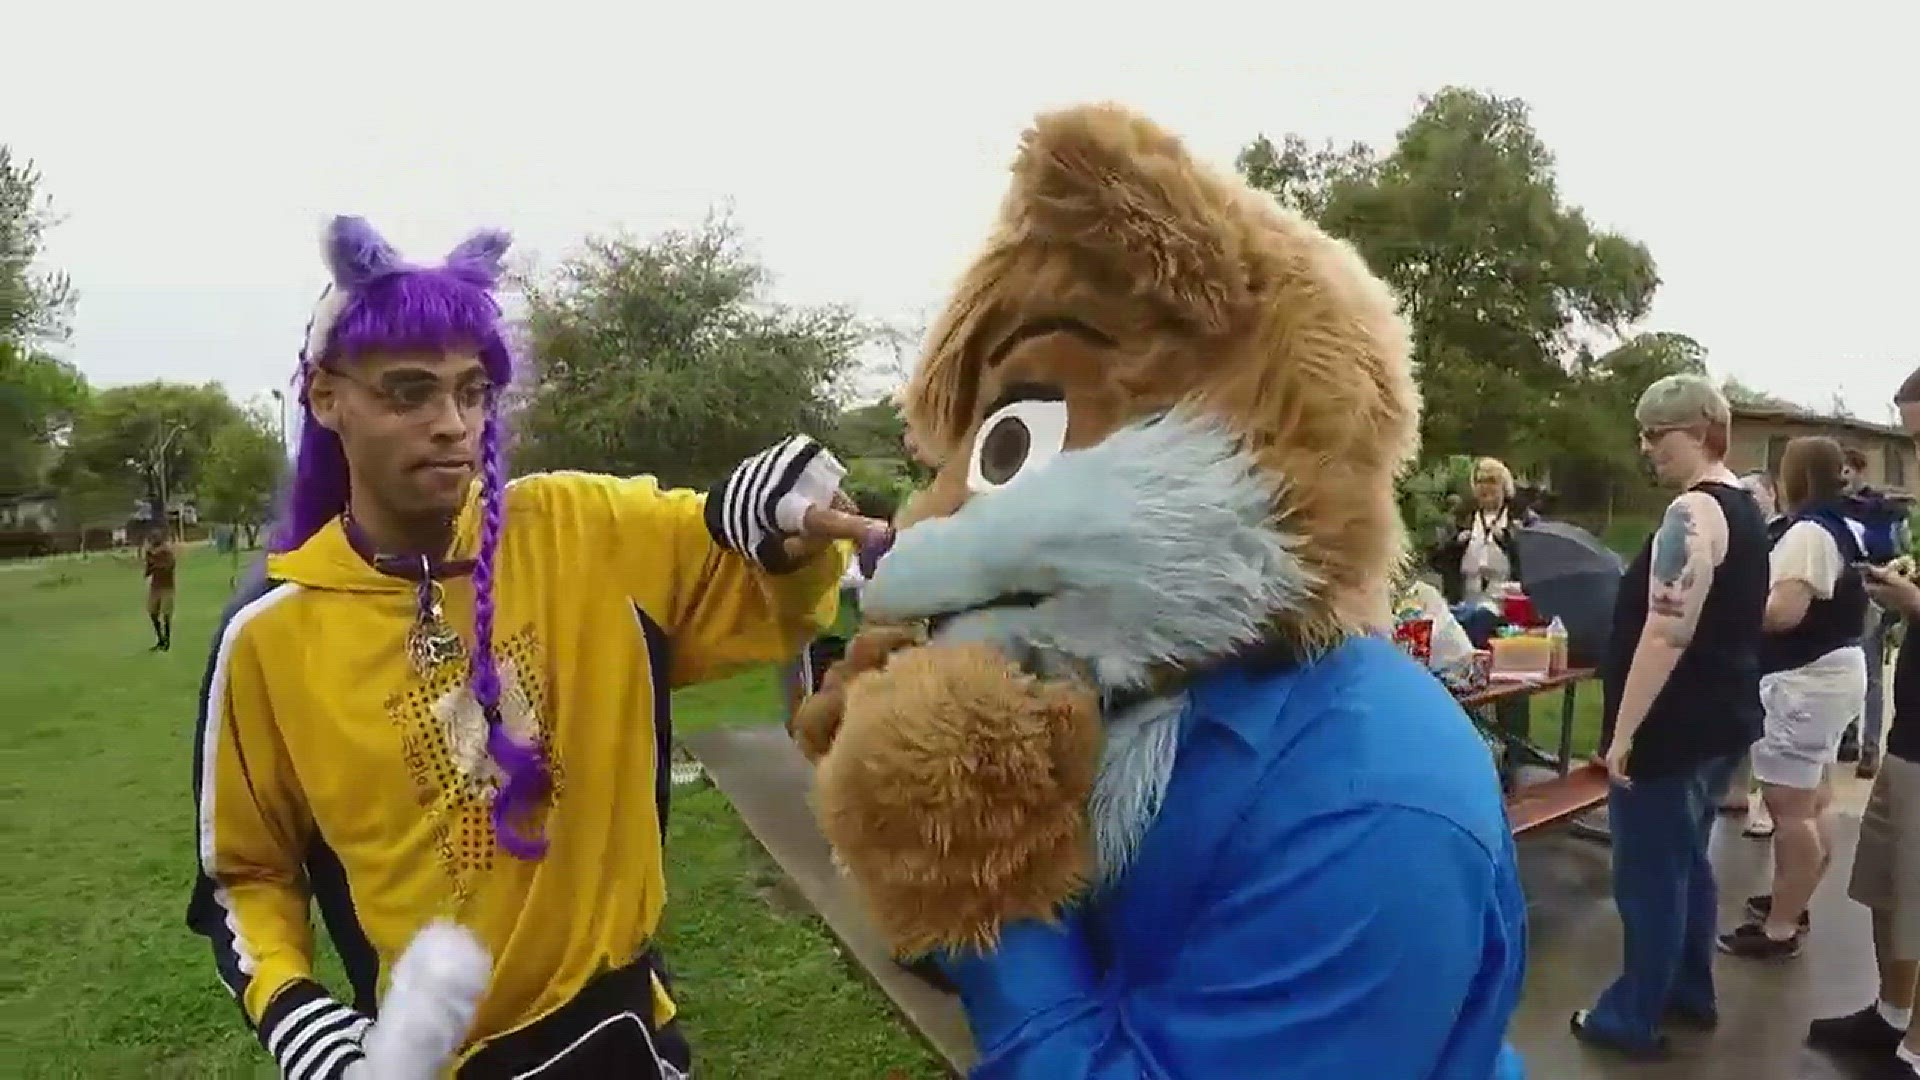 A growing group that enjoys dressing up in animal costumes are hoping to bring more than just smiles to San Antonio.